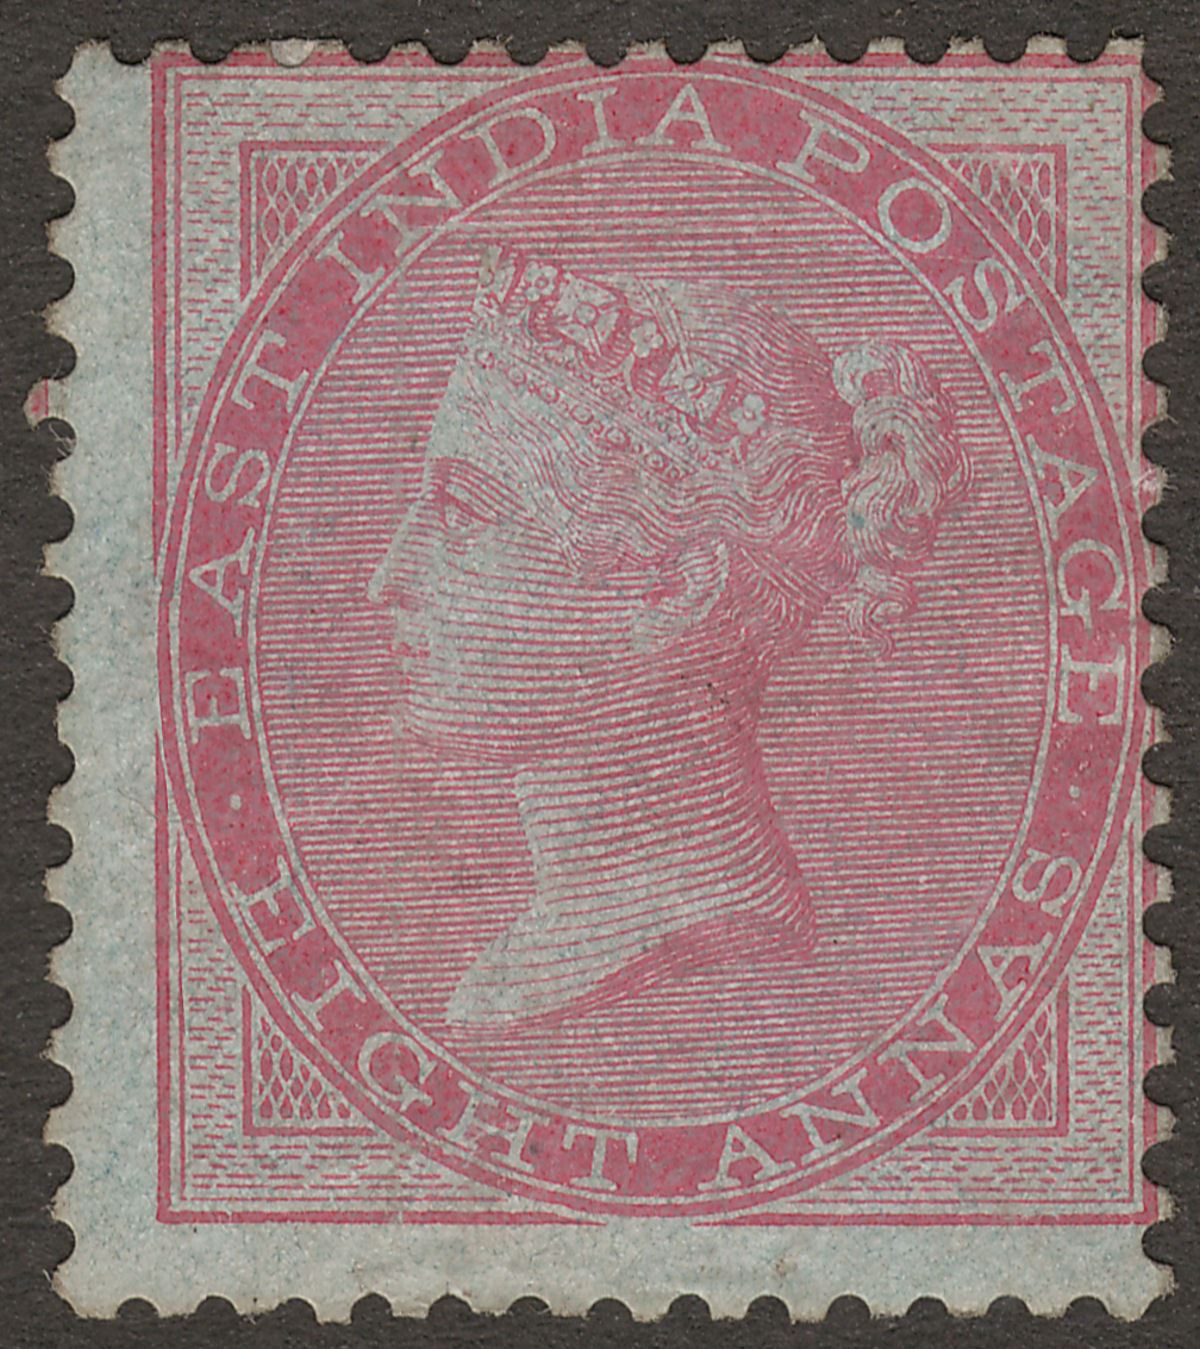 India 1855 QV 8a Carmine on Blue Paper Unused SG36 with Faults cat £1100 as mint